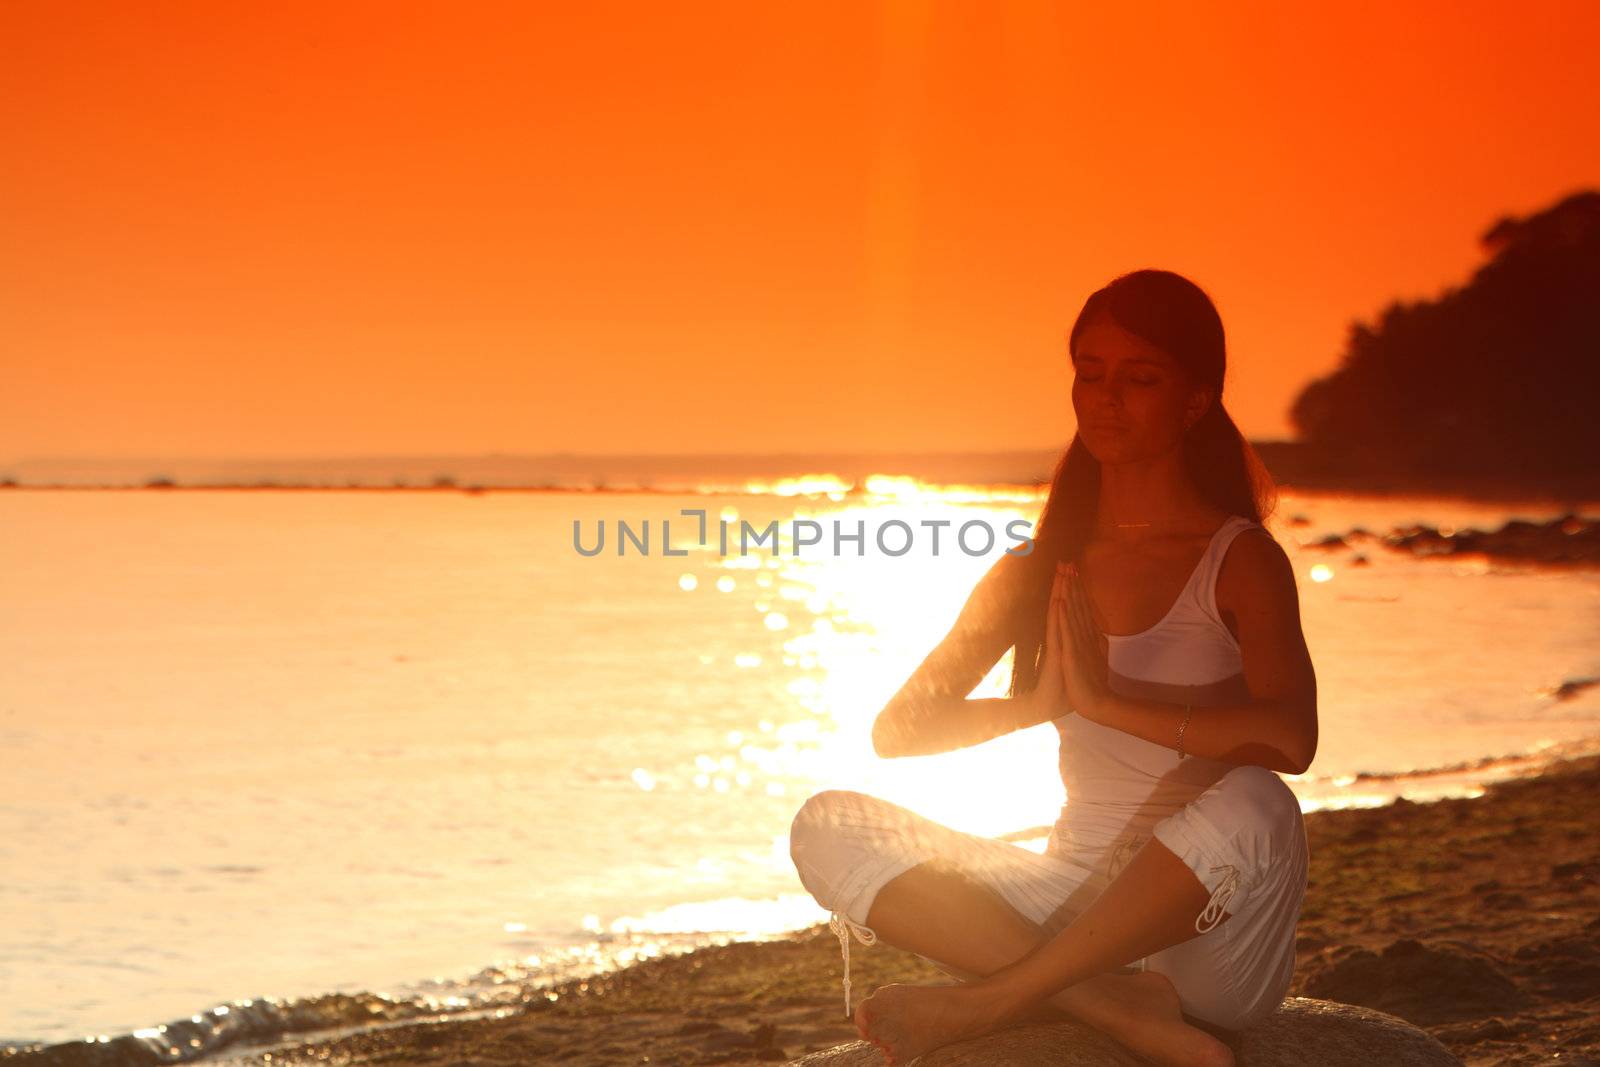 Young woman practicing yoga  near the ocean